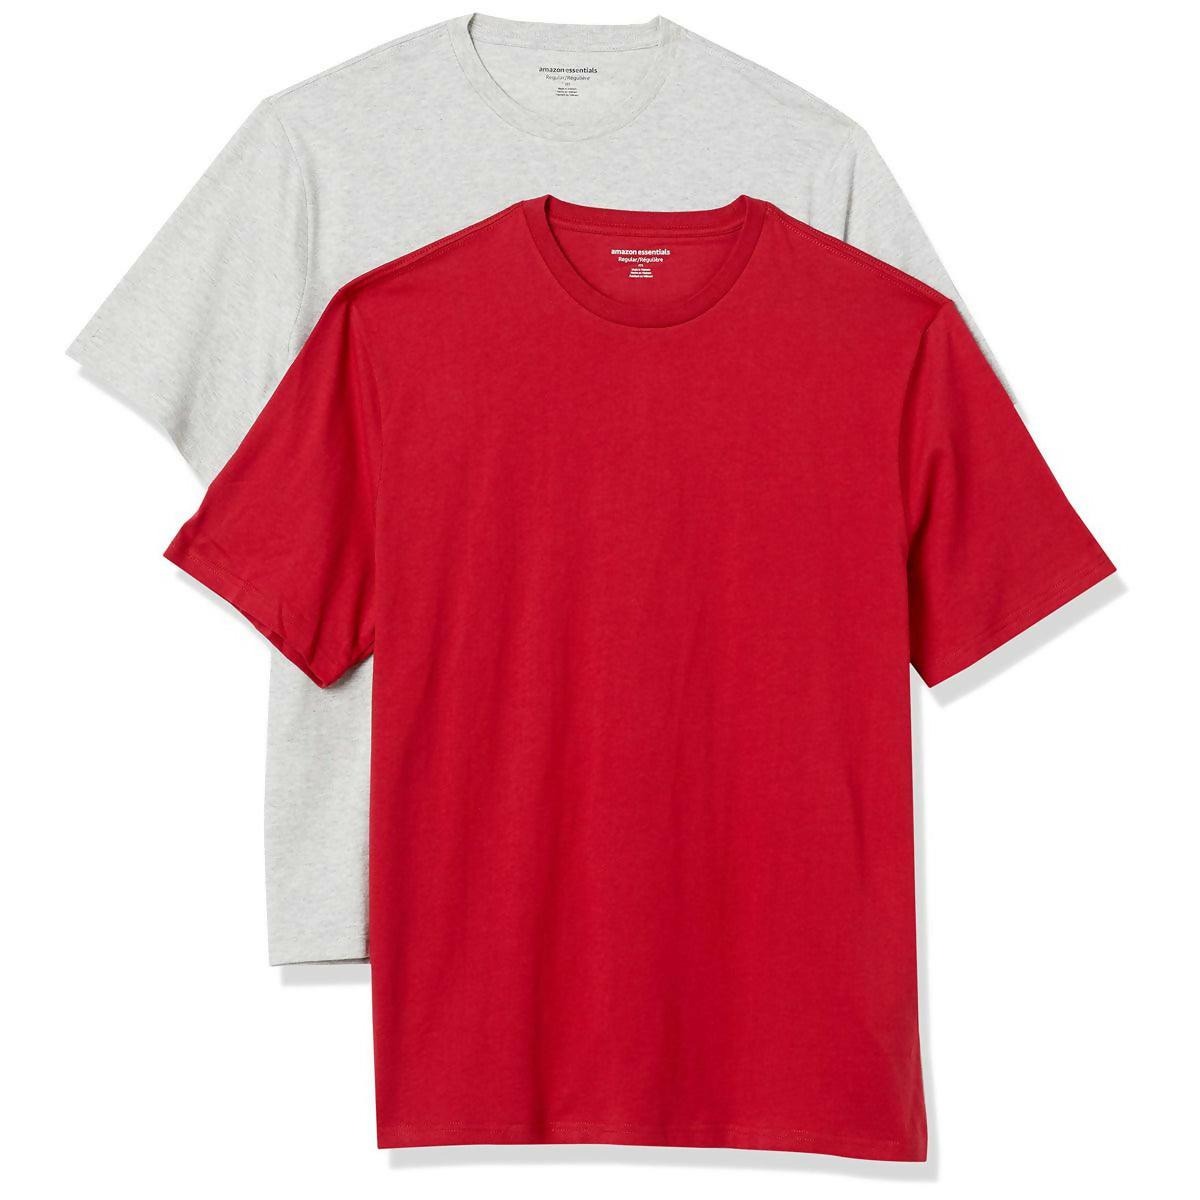 Khanani's T Shirt for Men Pack of 2 basic tees for summer- Red and Grey - ValueBox